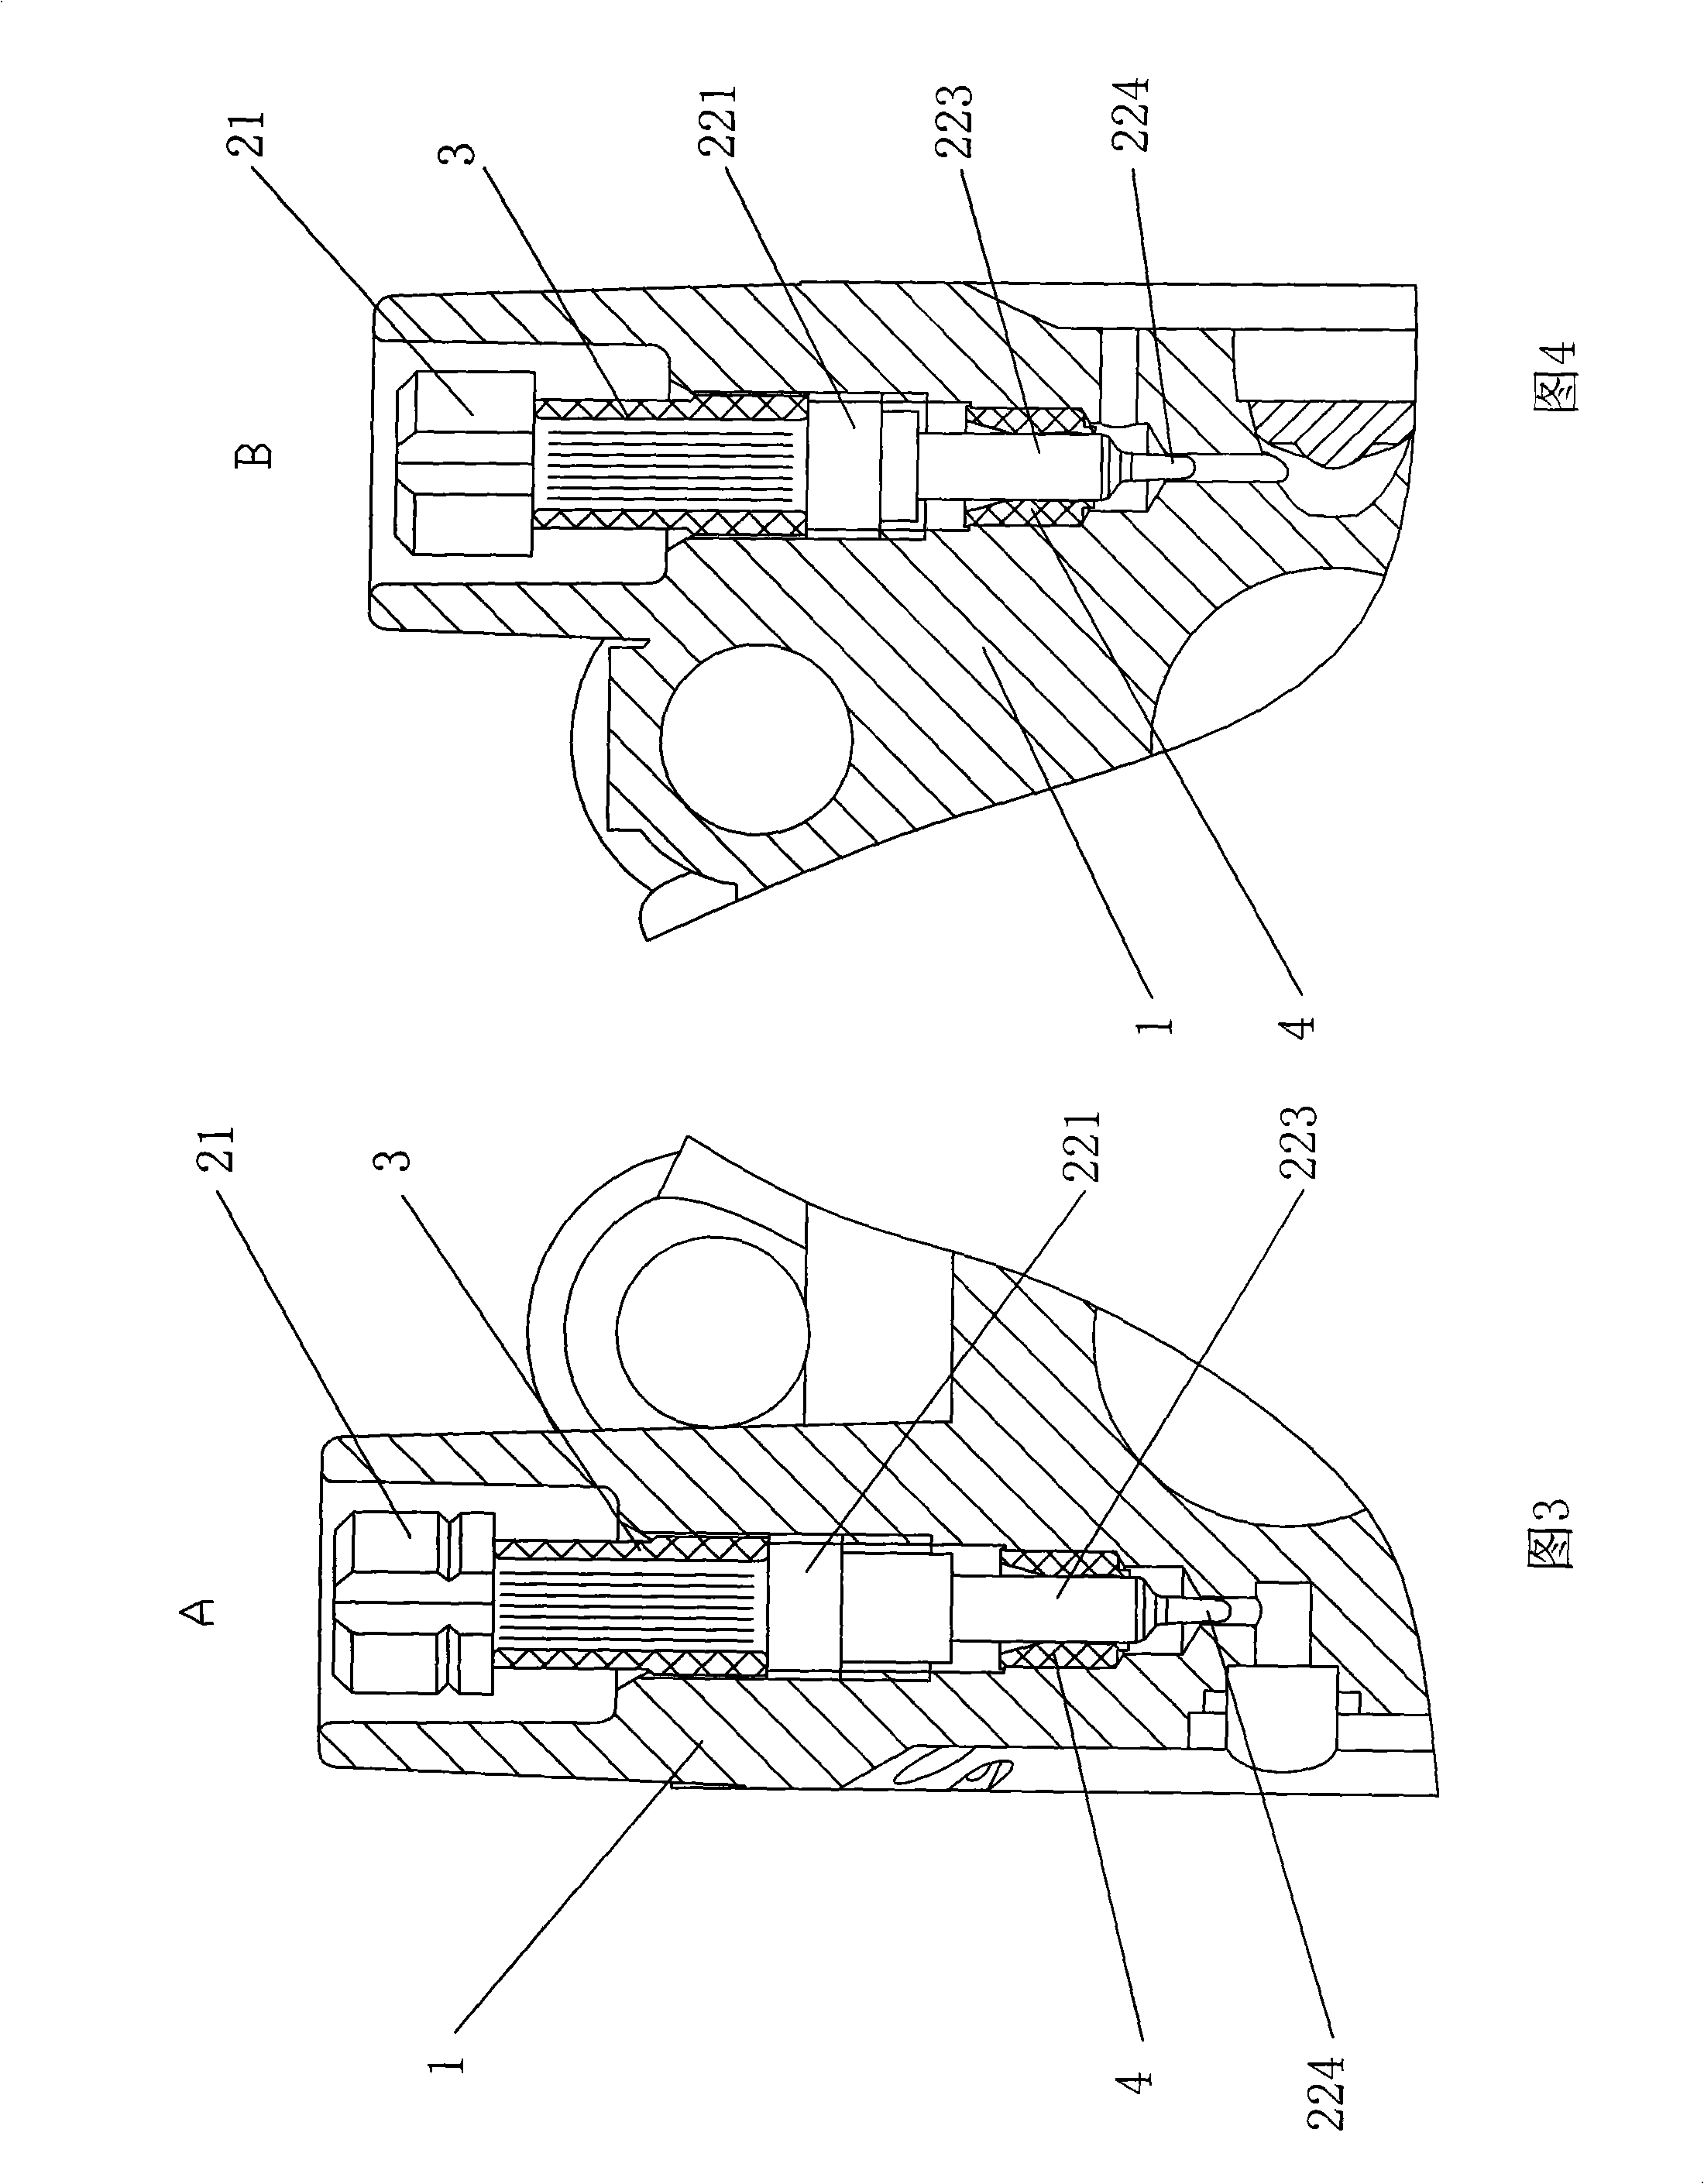 Carburetor for gasoline engine with needle valve provided with loose-proof sleeve